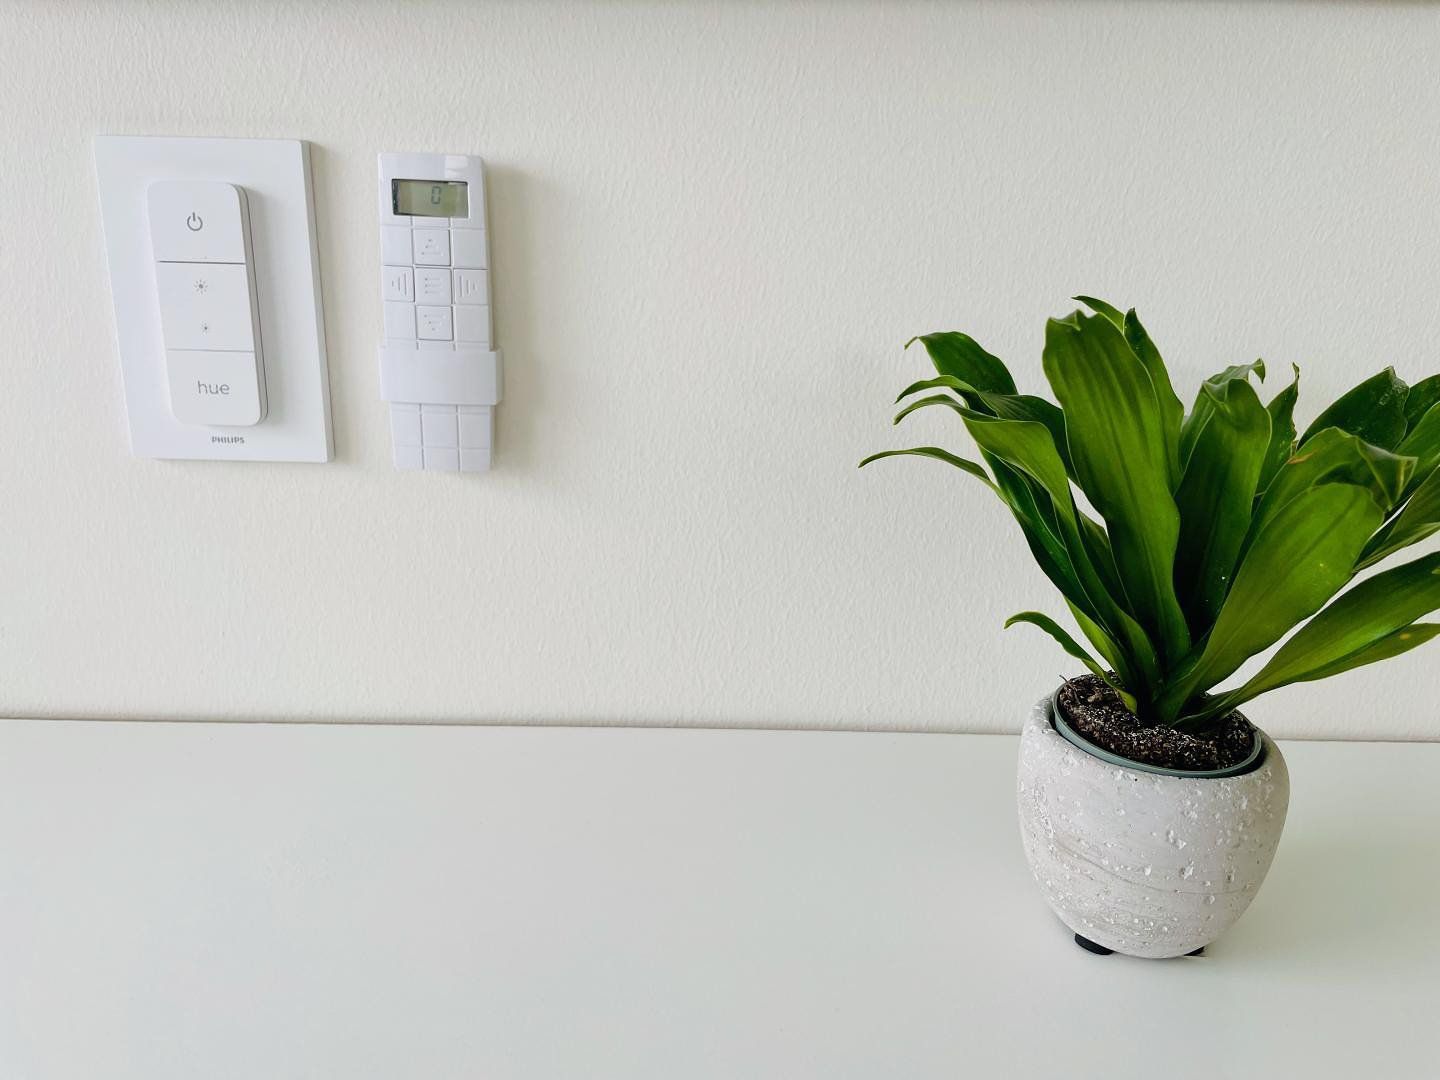 A wall-mounted Philips Hue dimmer and a Dracaena houseplant in a pot